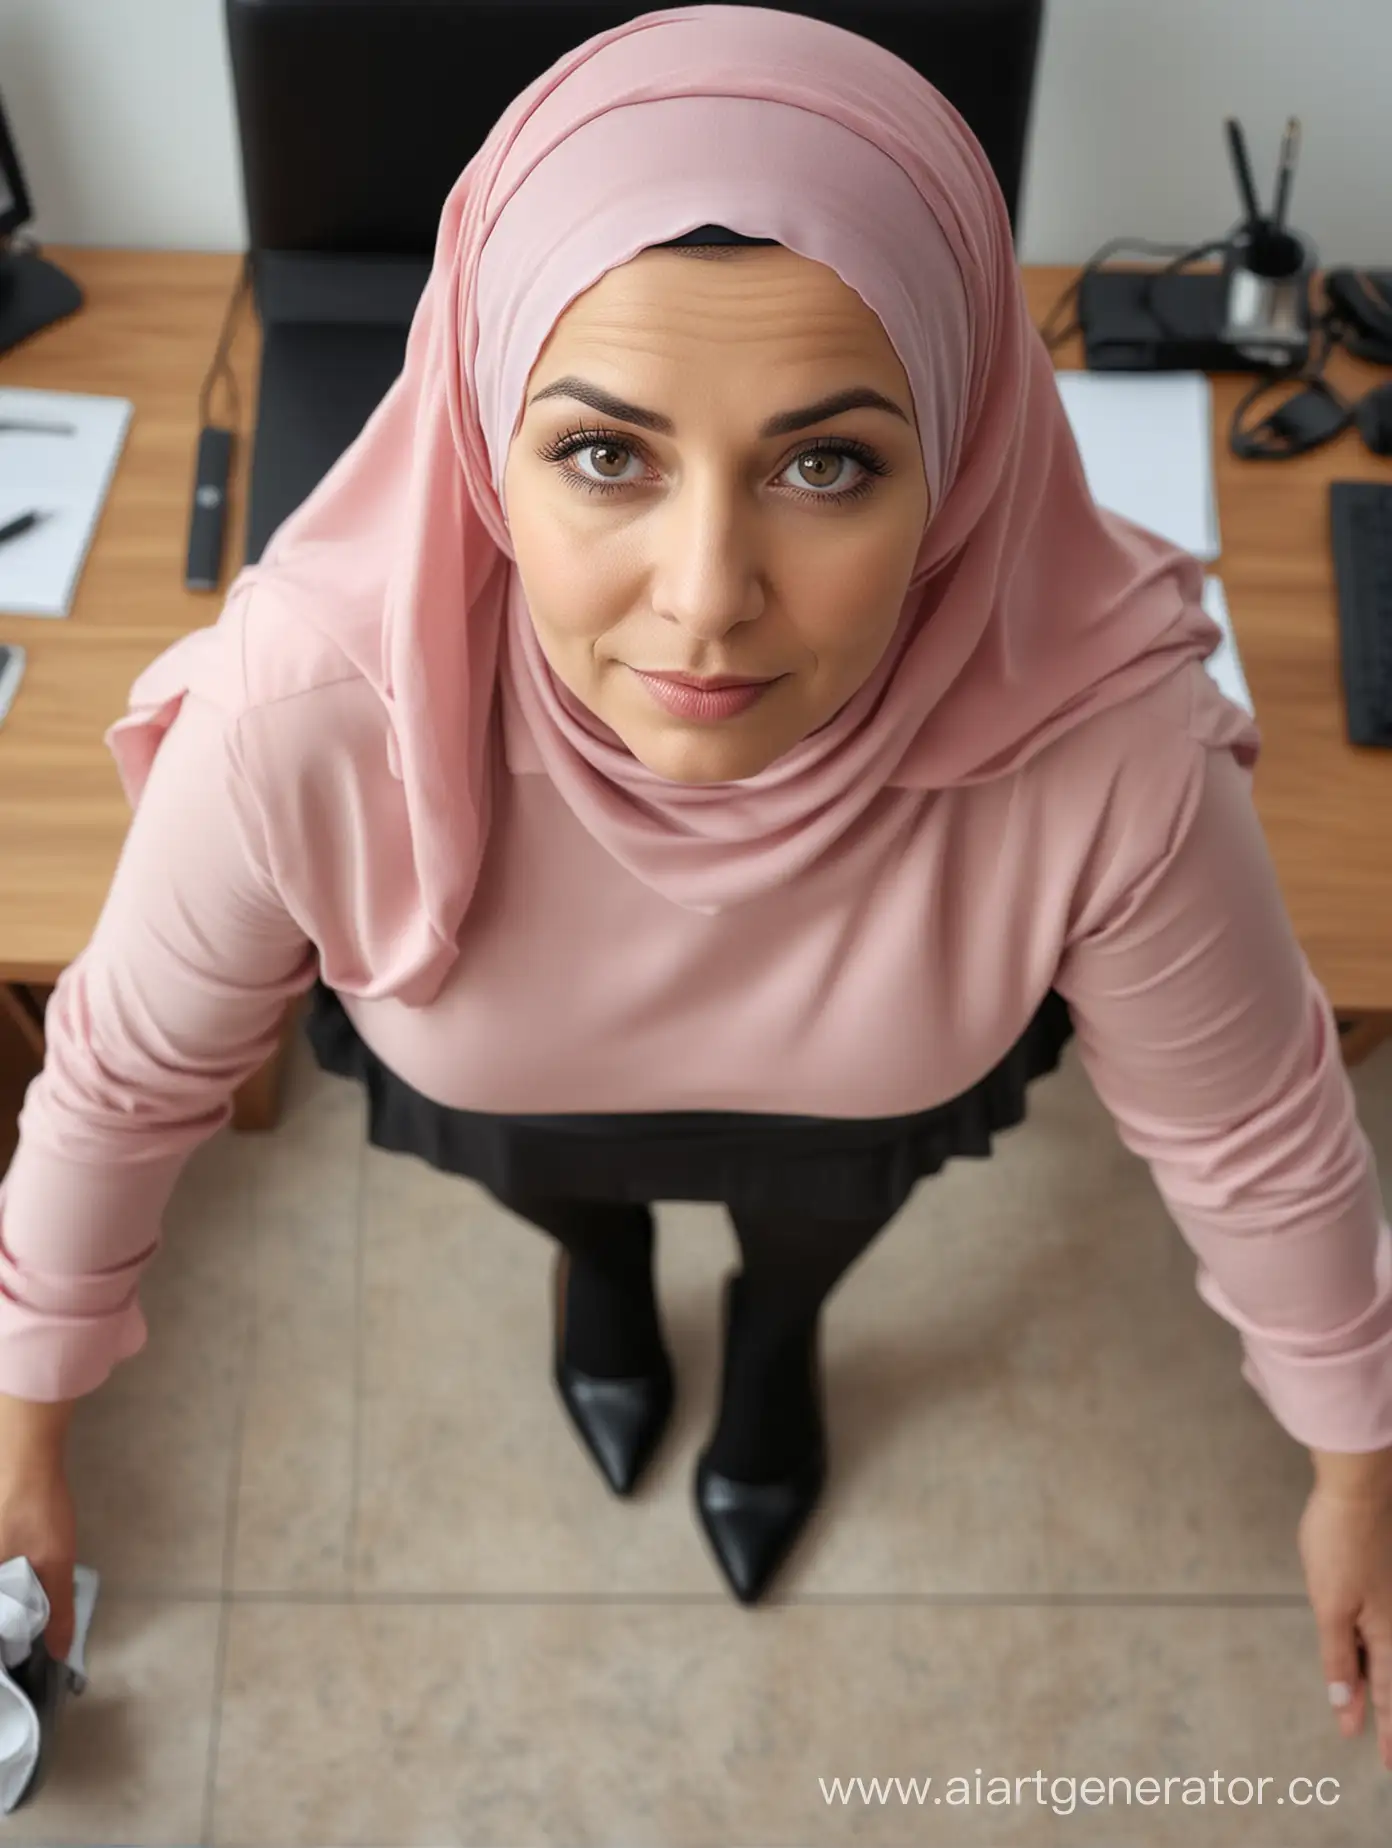 A dwarf woman. 60 years old. She wears a hijab, pencil skirt, black opaque tights, high heels. Office. Make up. Plump body. Curvy body. Her height is 130cm. Close pov shot. Close up. From above. Near the computer table. She has different face. She is granny. Wrinkled face. American. She extends her hands to the viewer. 8k sharp.